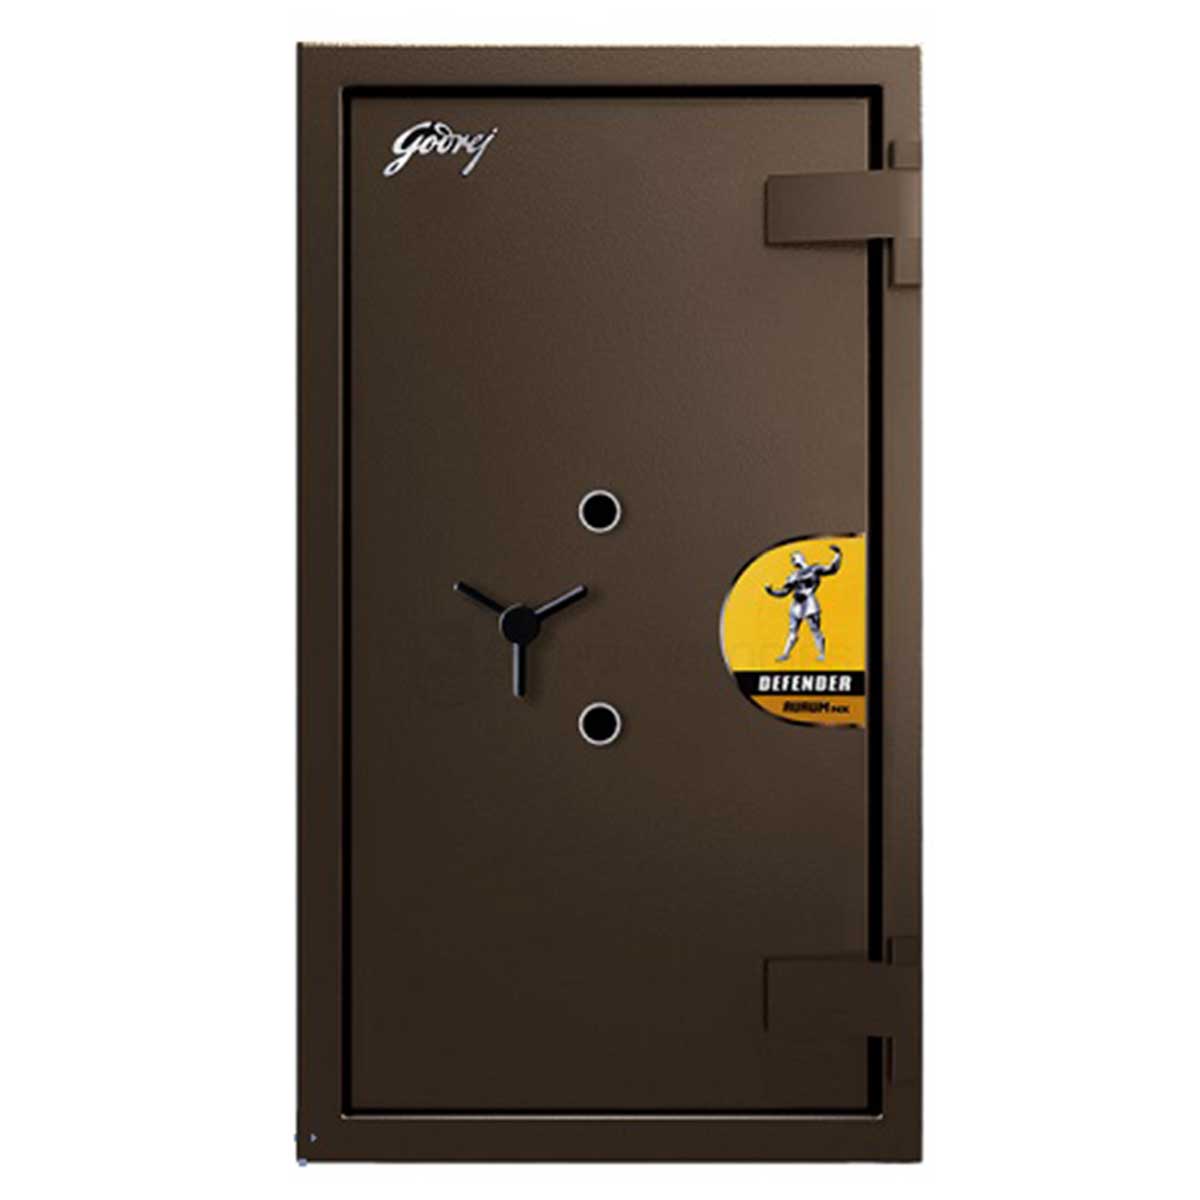 Godrej safety locker Manufacturers, Suppliers in Faridabad Sector 16